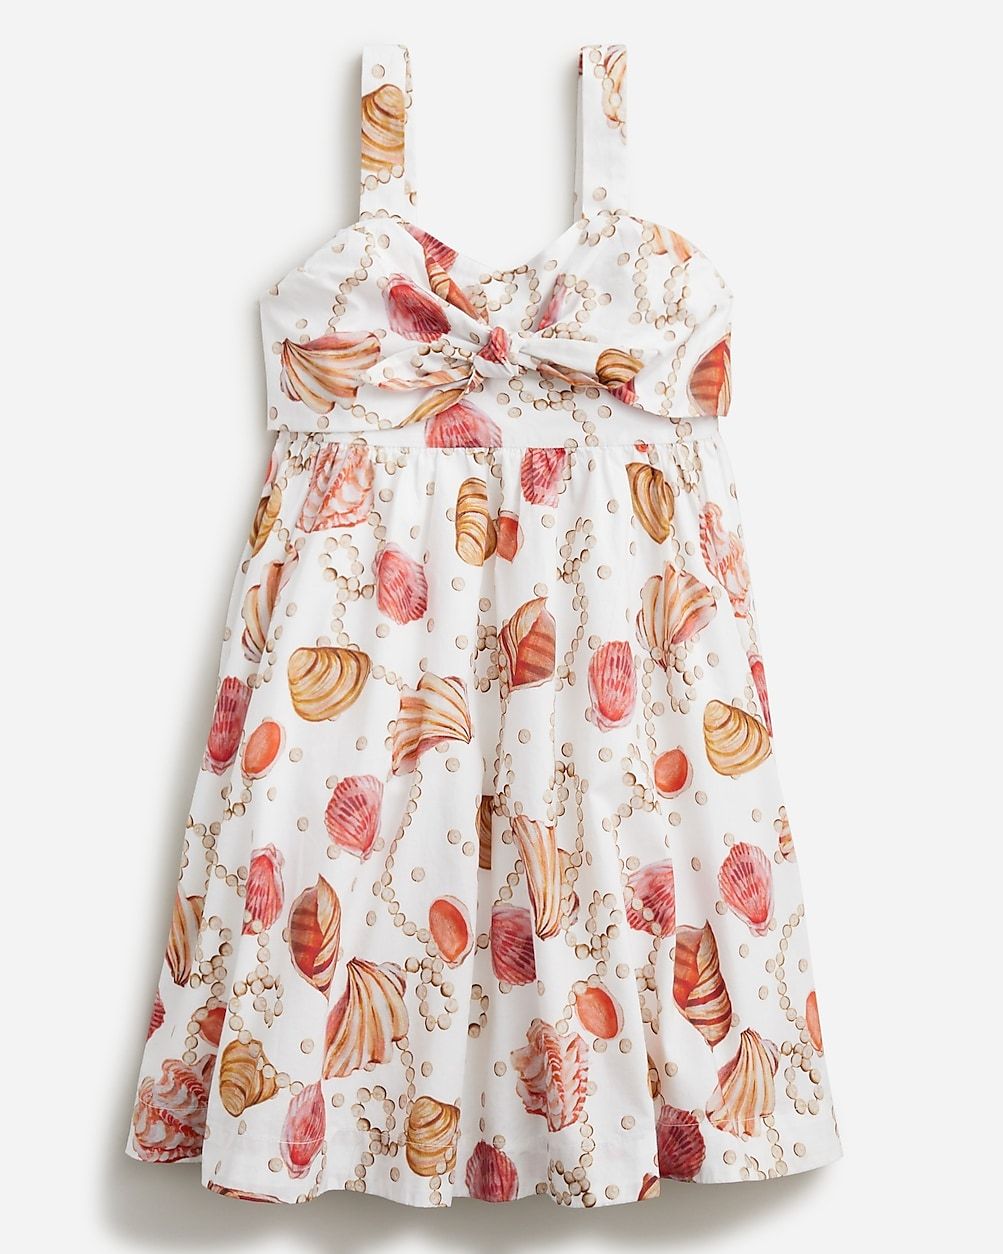 Girls' bow-front dress in painted seashell print | J.Crew US